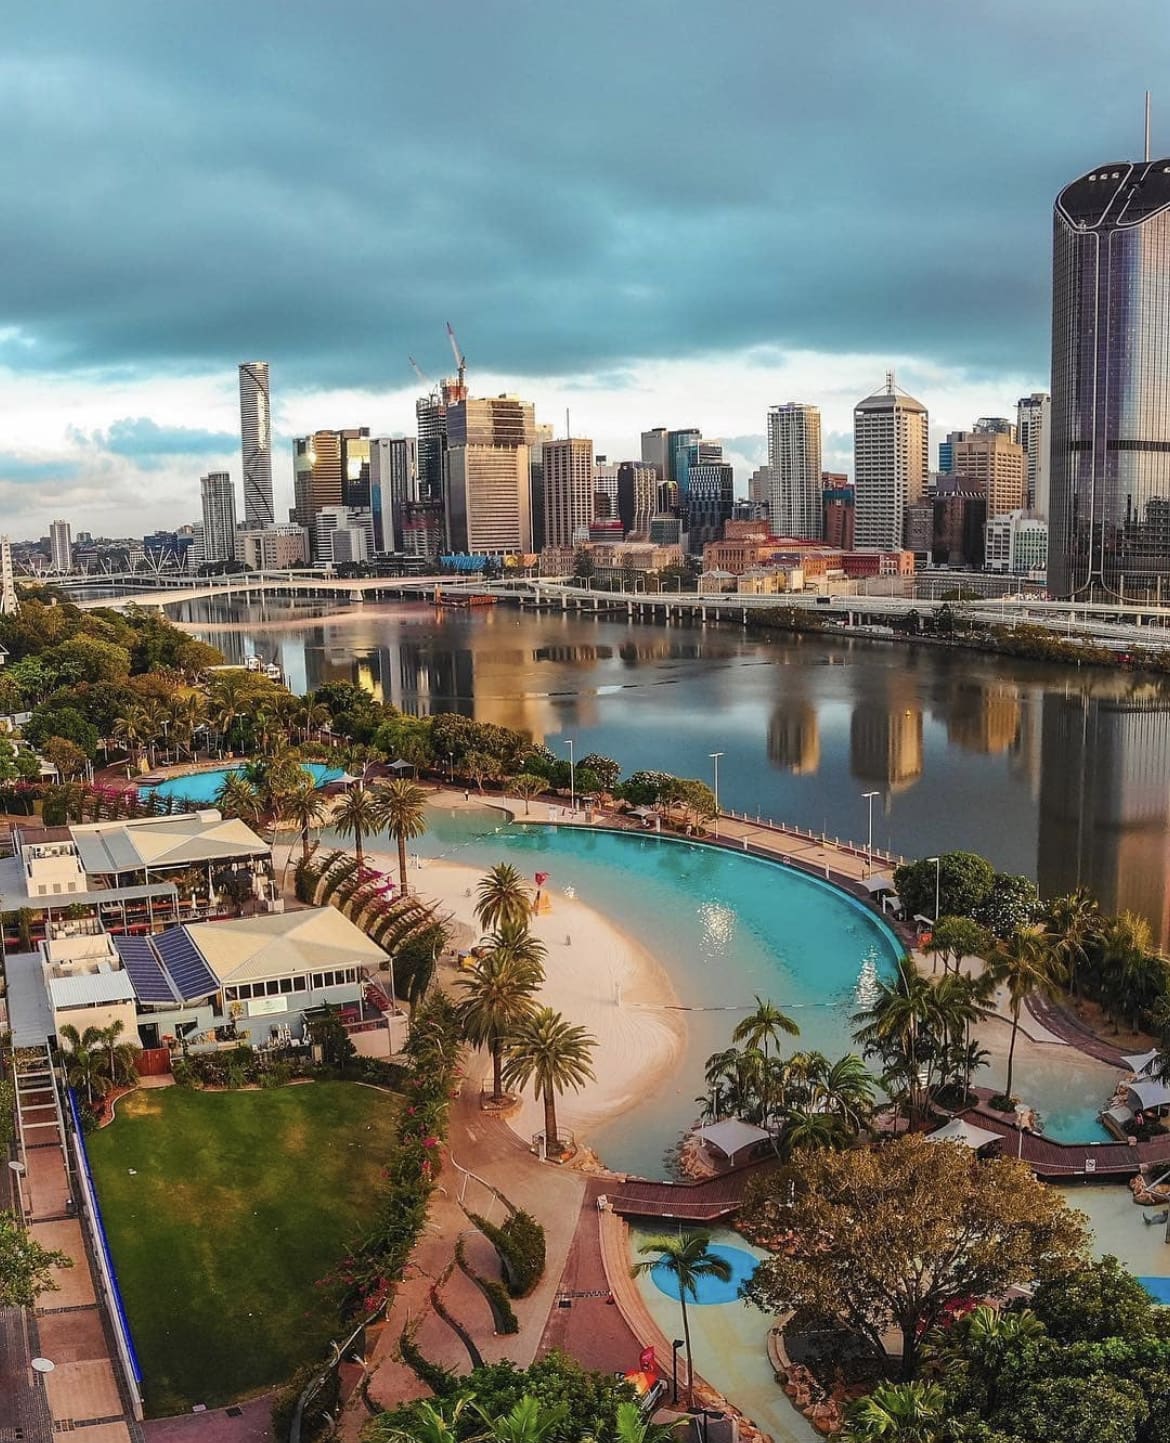 South Bank Parklands - The 15 Best Things To Do in Brisbane, Australia